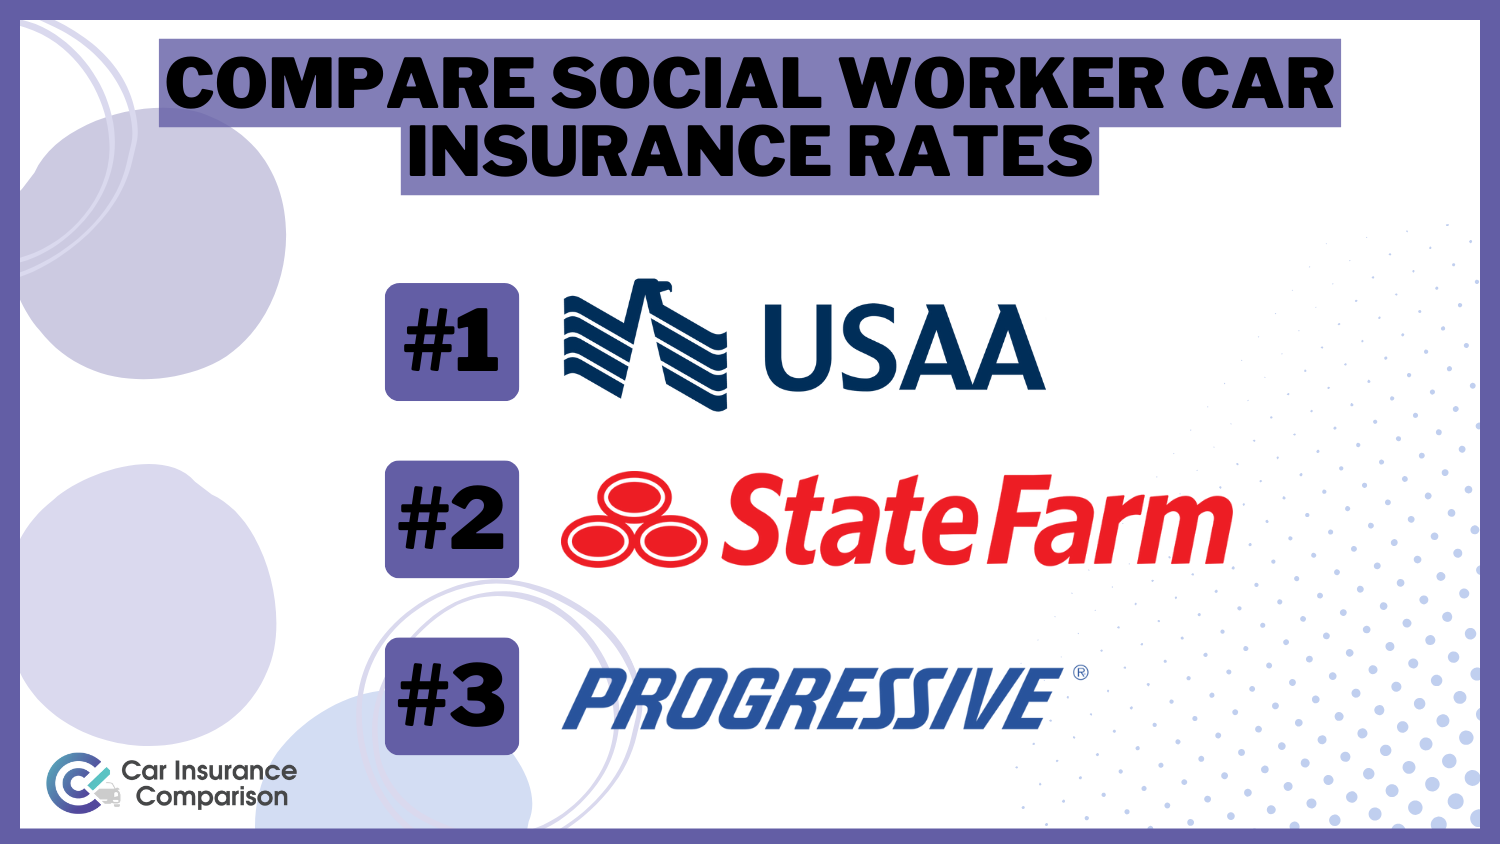 USAA, Allstate and Progressive: Compare Social Worker Car Insurance Rates